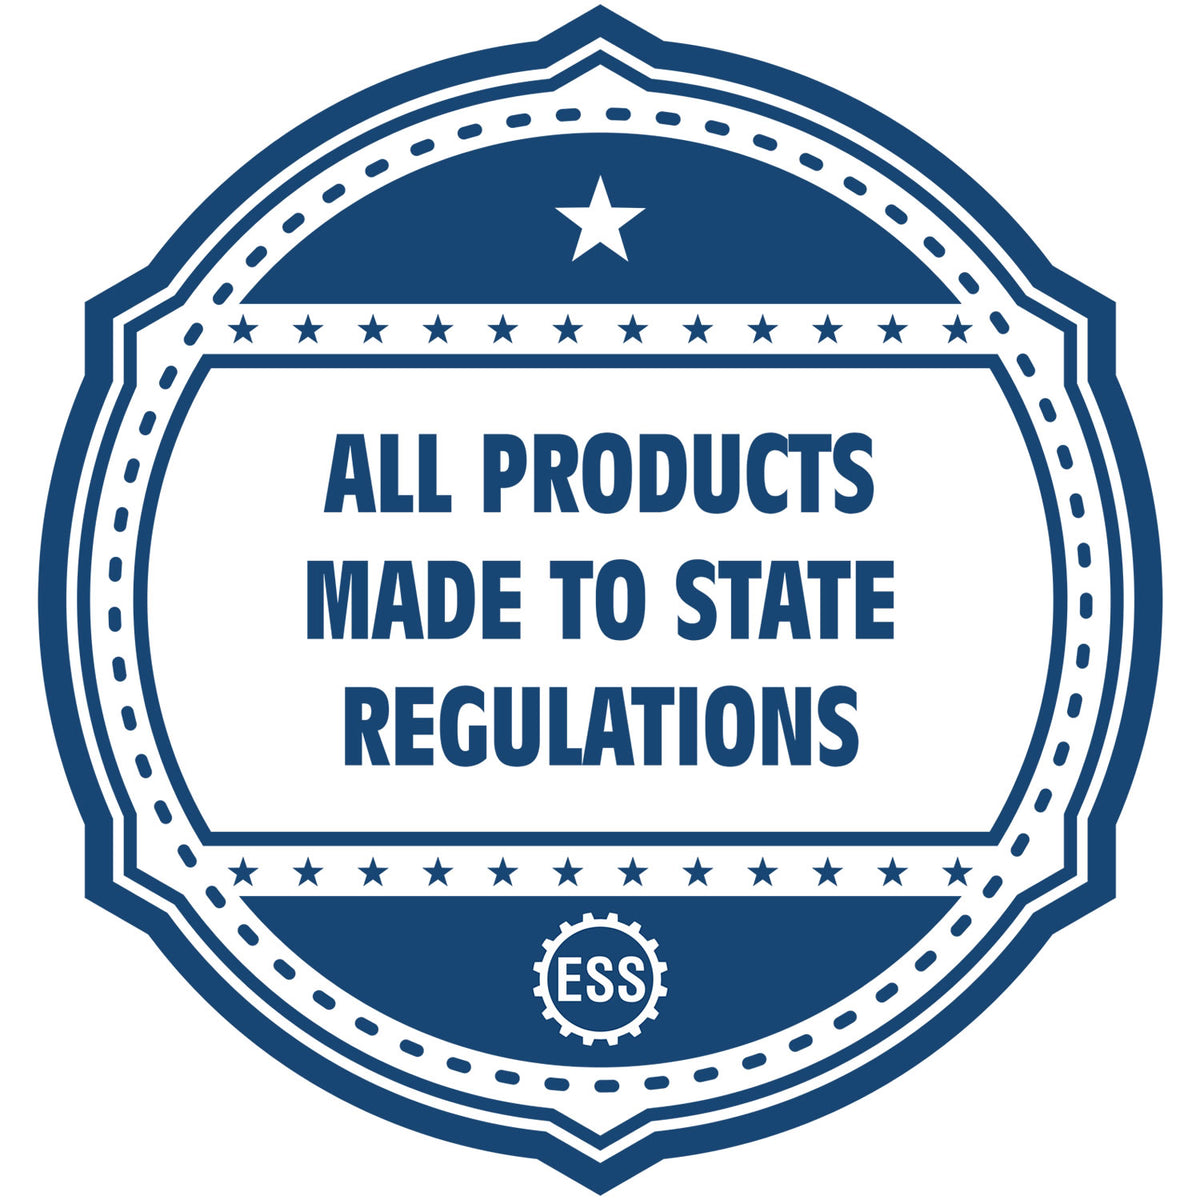 An icon or badge element for the Self-Inking California PE Stamp showing that this product is made in compliance with state regulations.